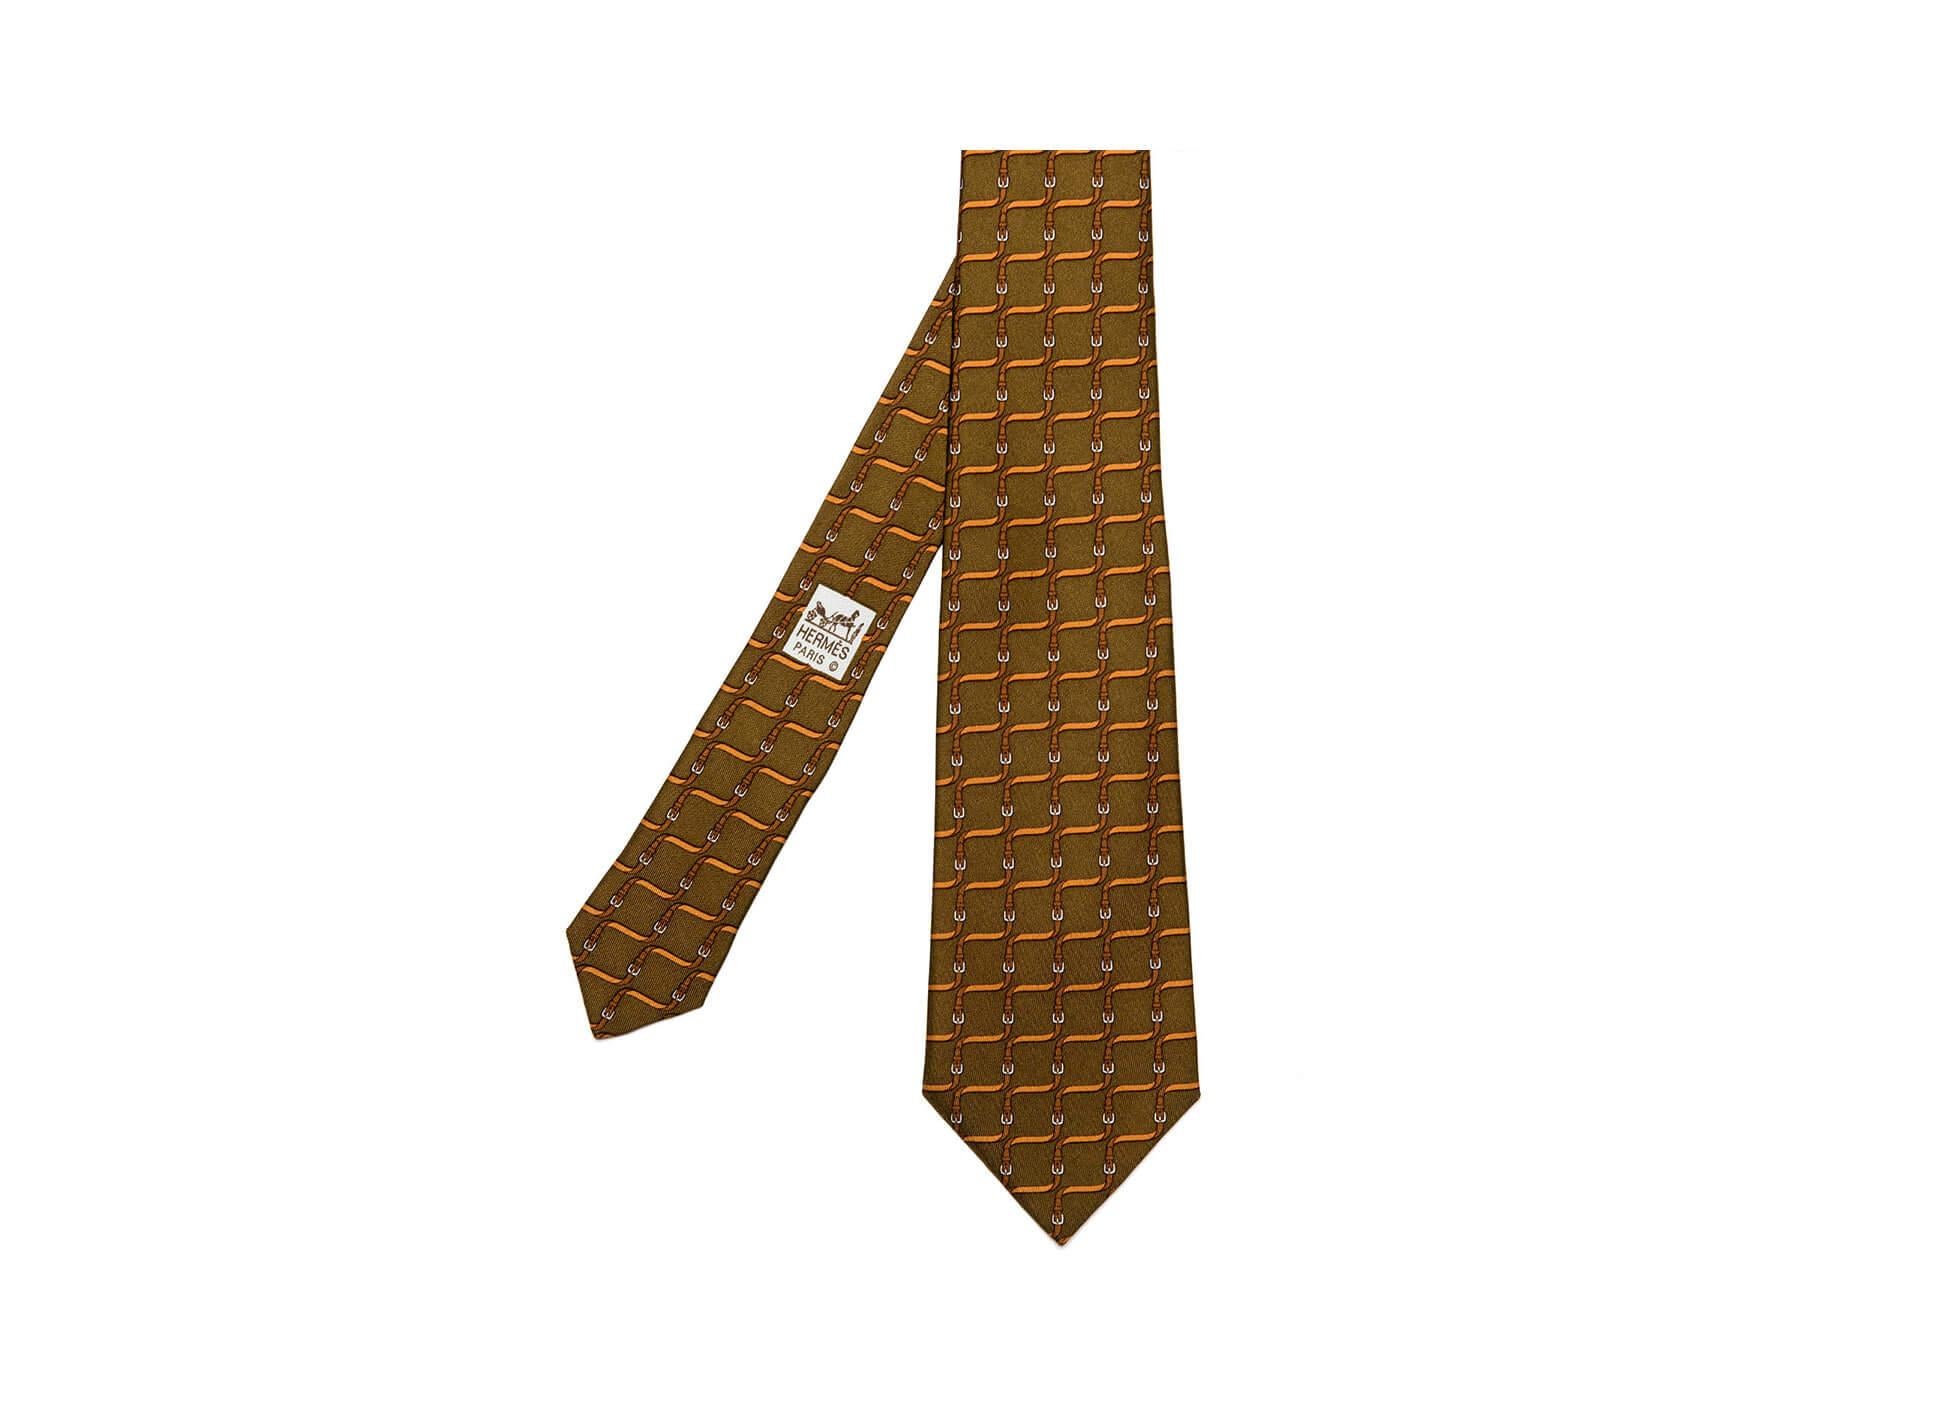 Pristine Vintage Hermes silk Tie 'Straps & Buckles' In Excellent Condition For Sale In London, GB